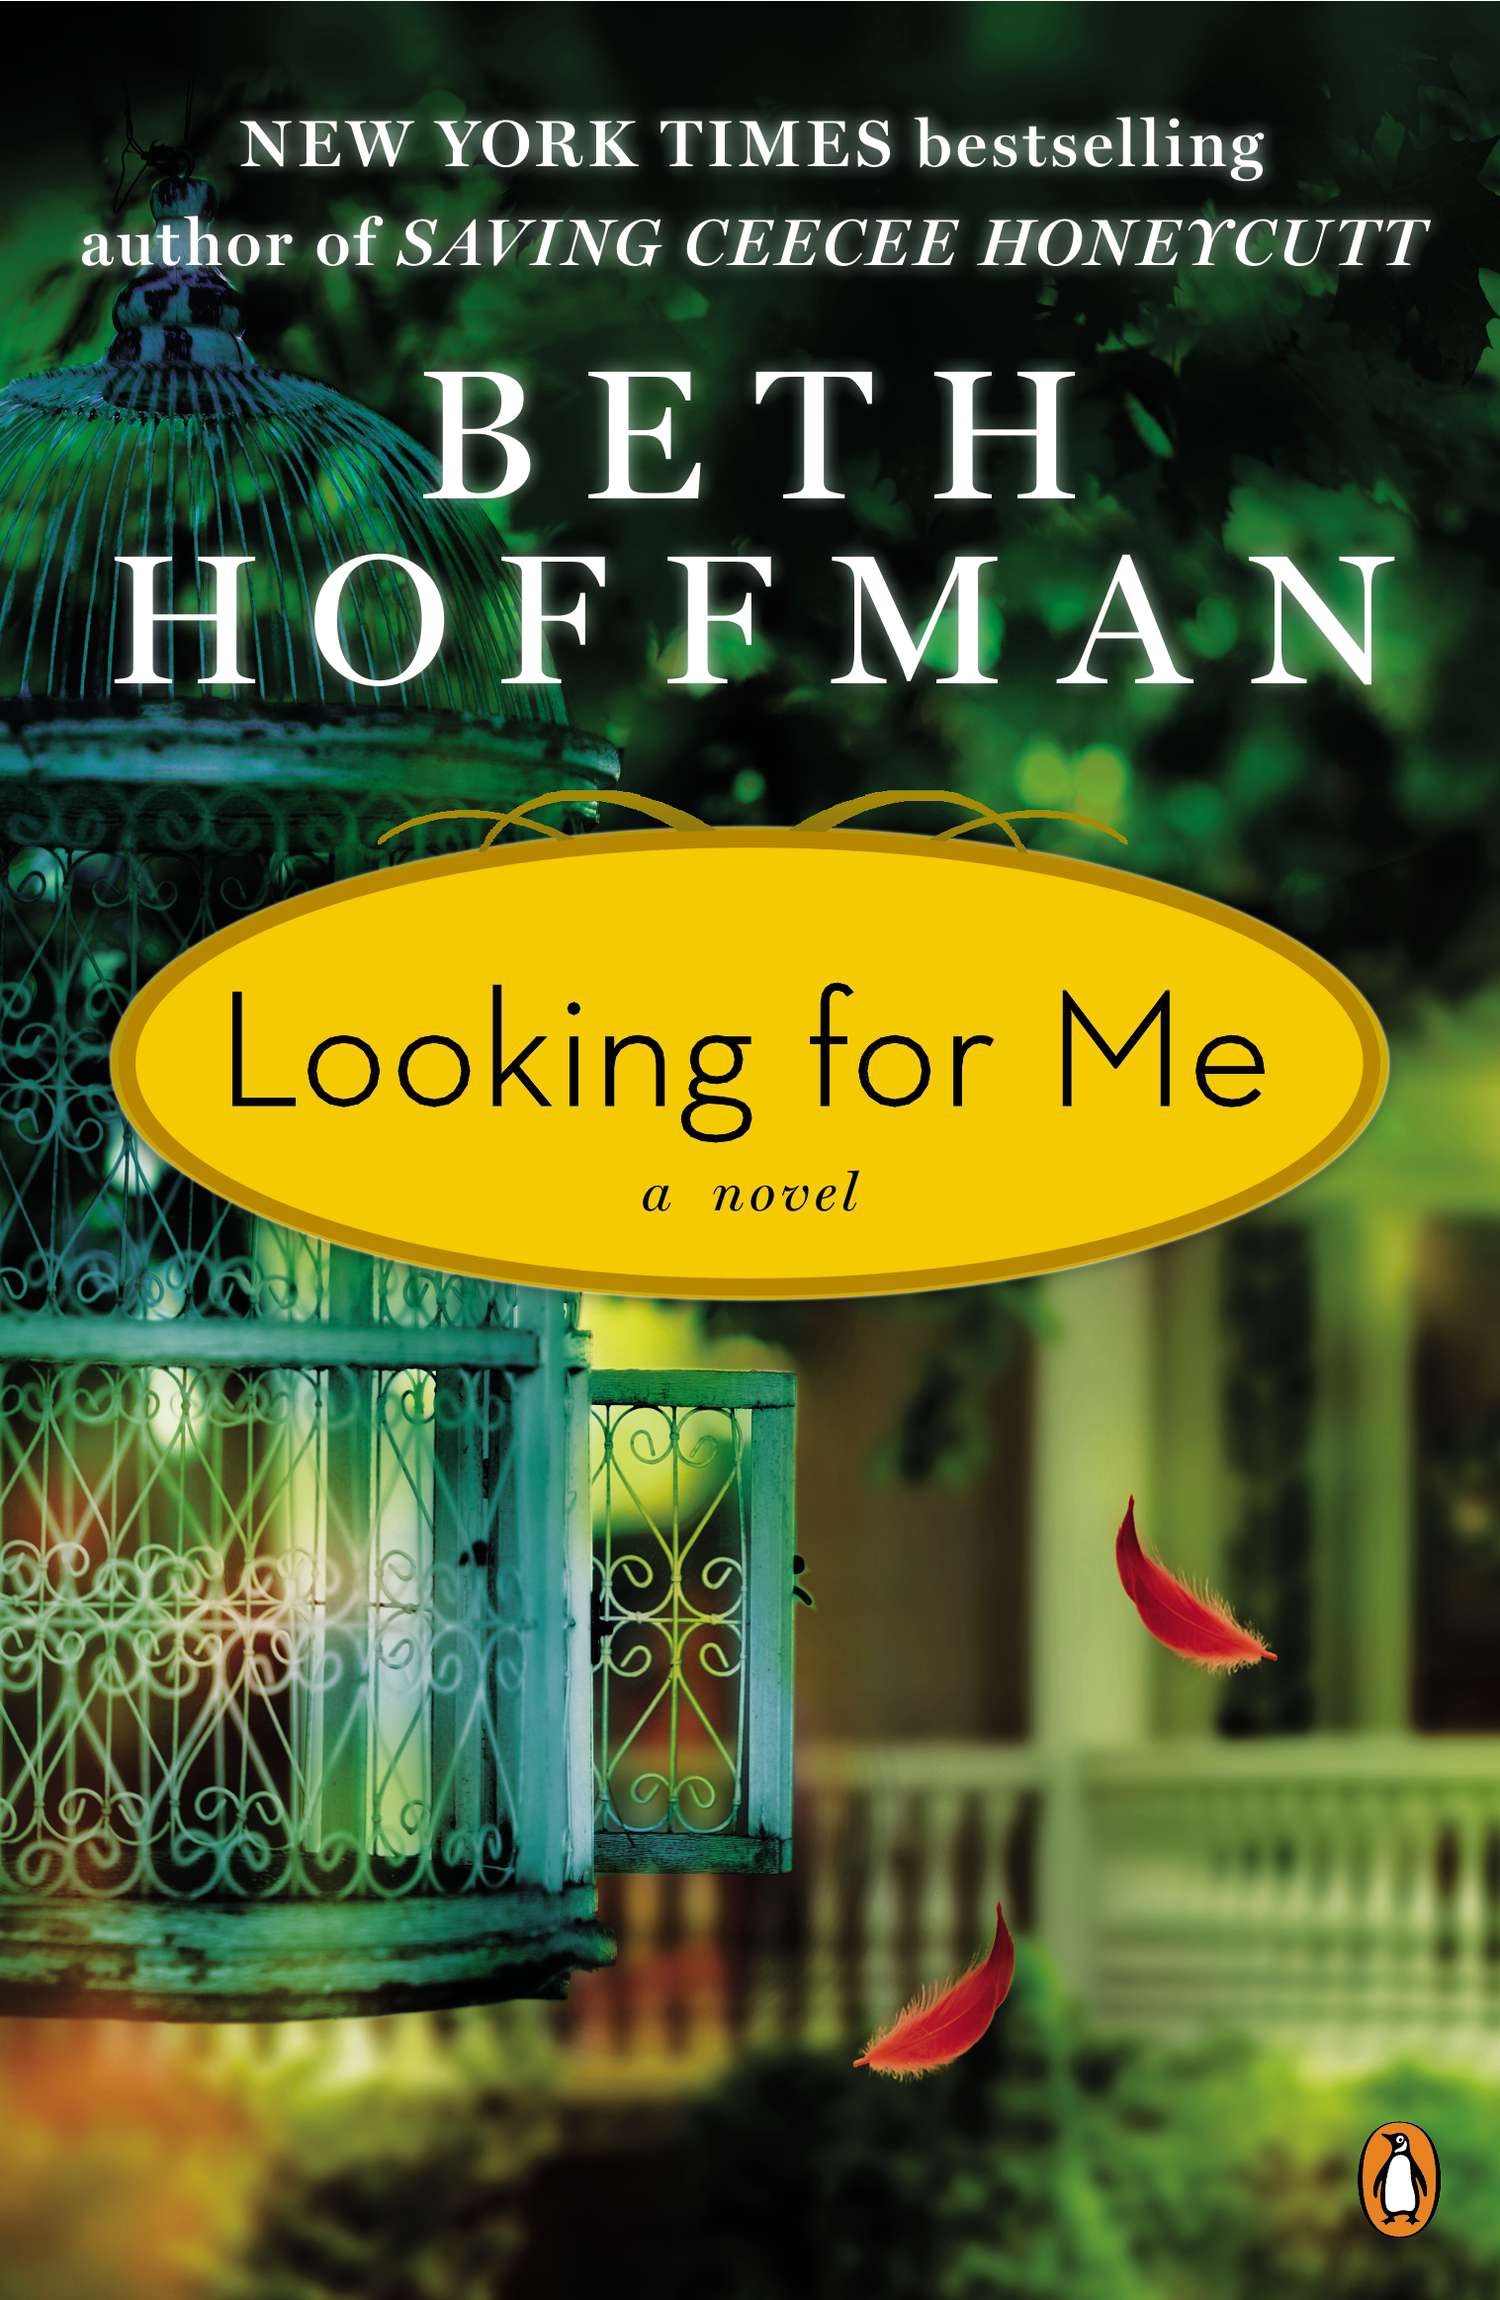 Looking for Me by Betsy Rosenthal